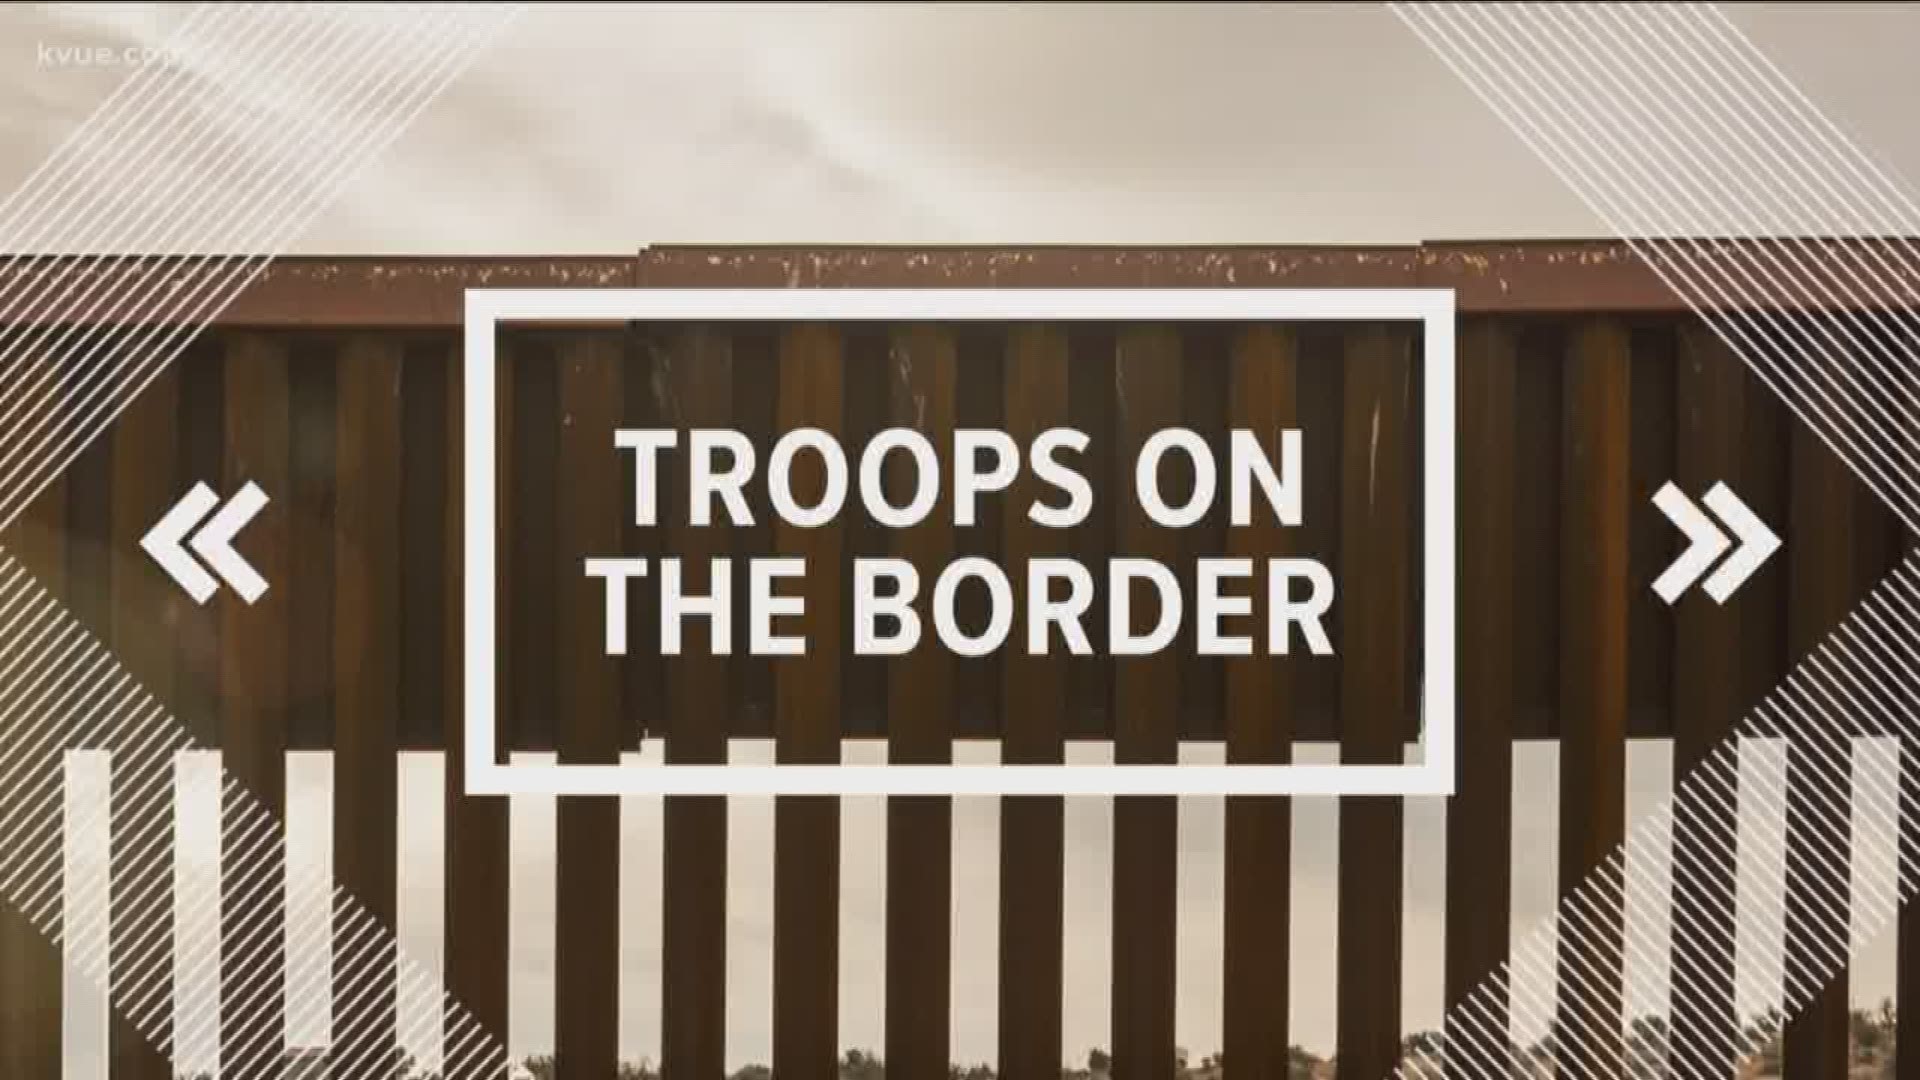 Governor Greg Abbott is deploying 1,000 Texas National Guard troops to the Texas-Mexico border.